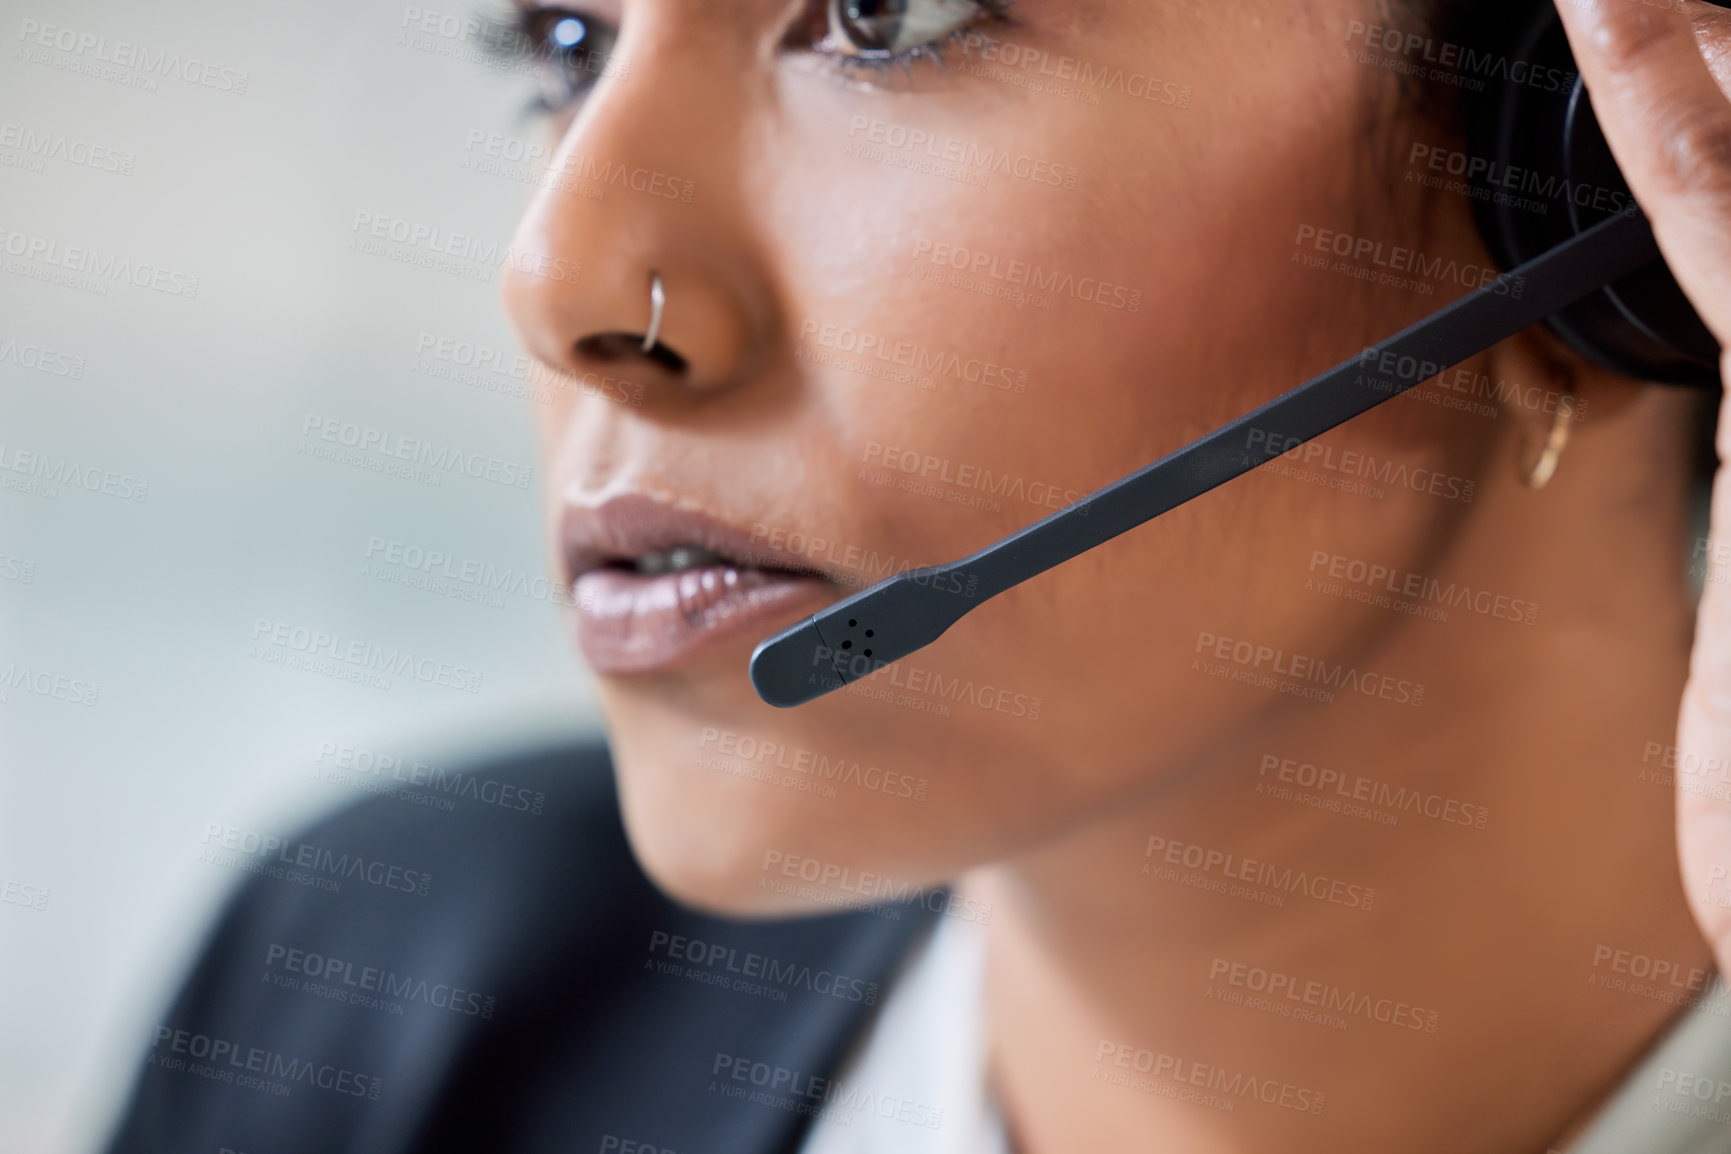 Buy stock photo Crm, call center and business woman face with headset and phone consultation. Contact us, telemarketing and web support employee with customer service worker and consultant work in a agency office